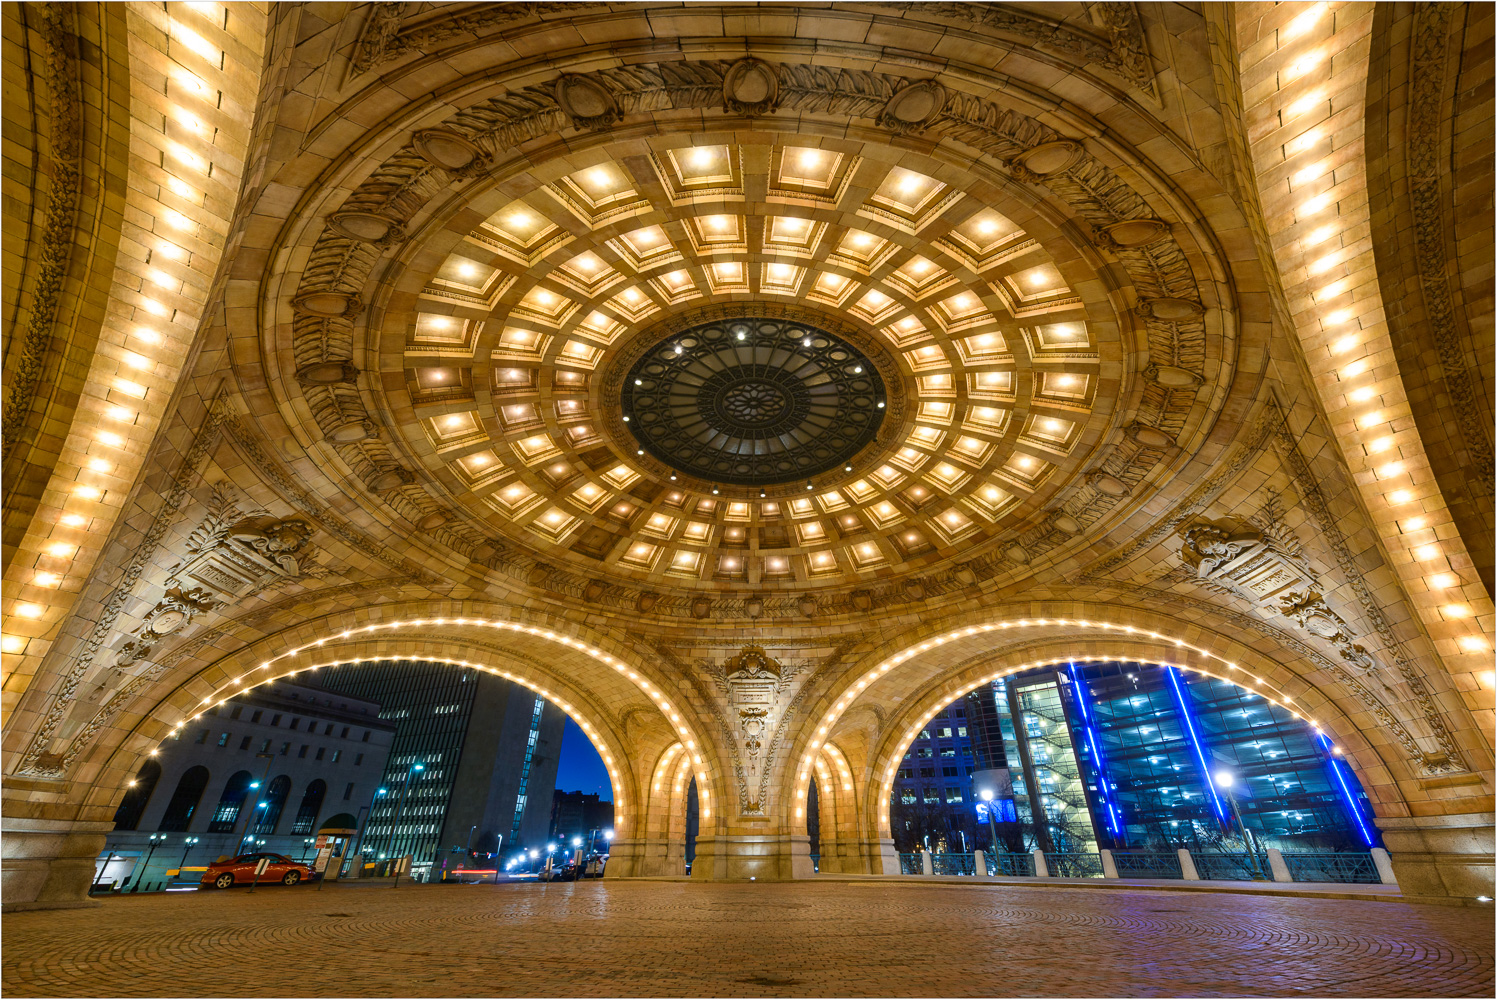 The-Arches-Of-Penn-Station.jpg